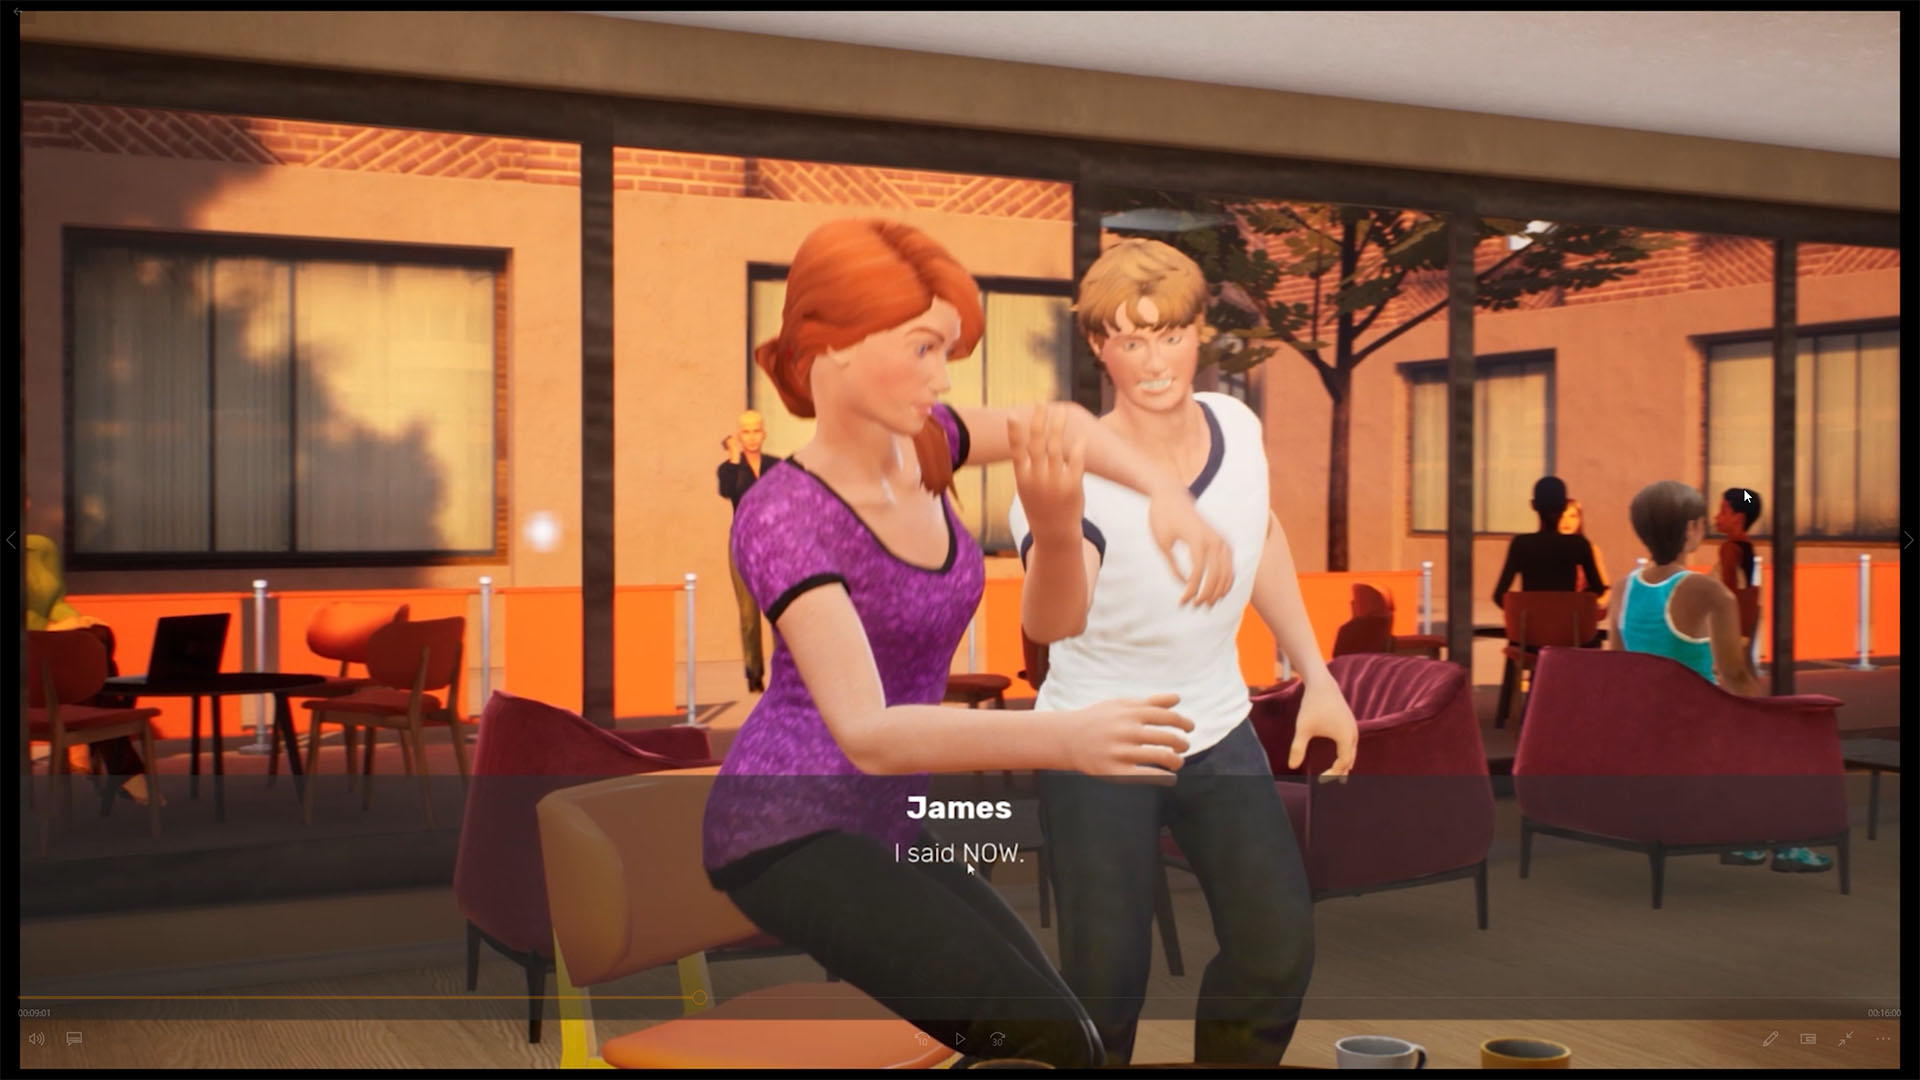 An image from a None In Three computer game with a boy speaking aggressively to a girl